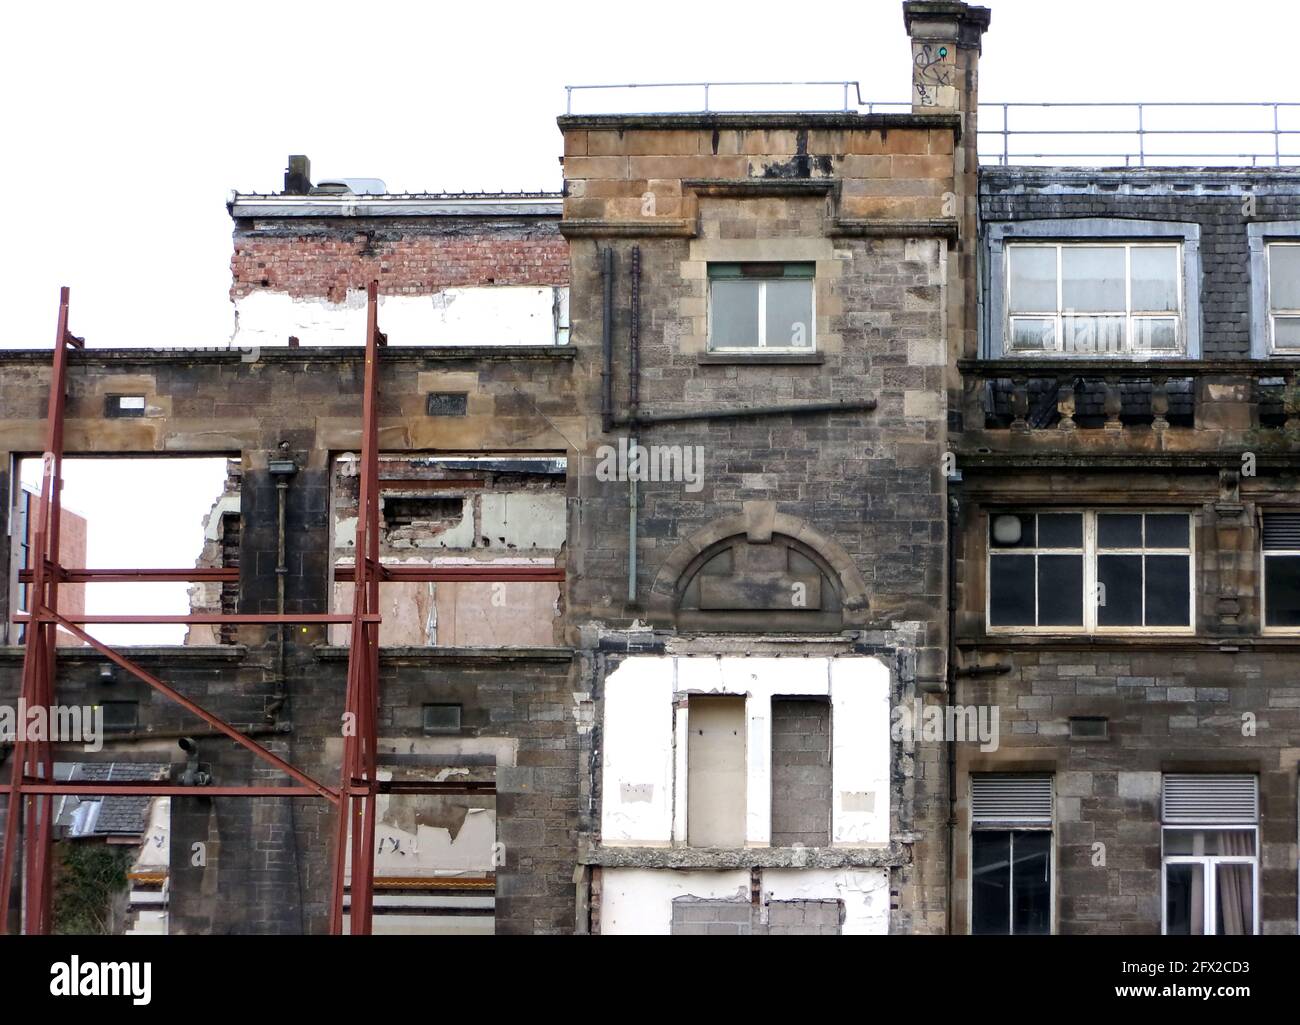 The interior of a building has left the shapes, and, an abstract 'footprint' after the walls have been demolished. The building is now waiting to be demolished completely. ALAN WYLIE/ALAMY© Stock Photo